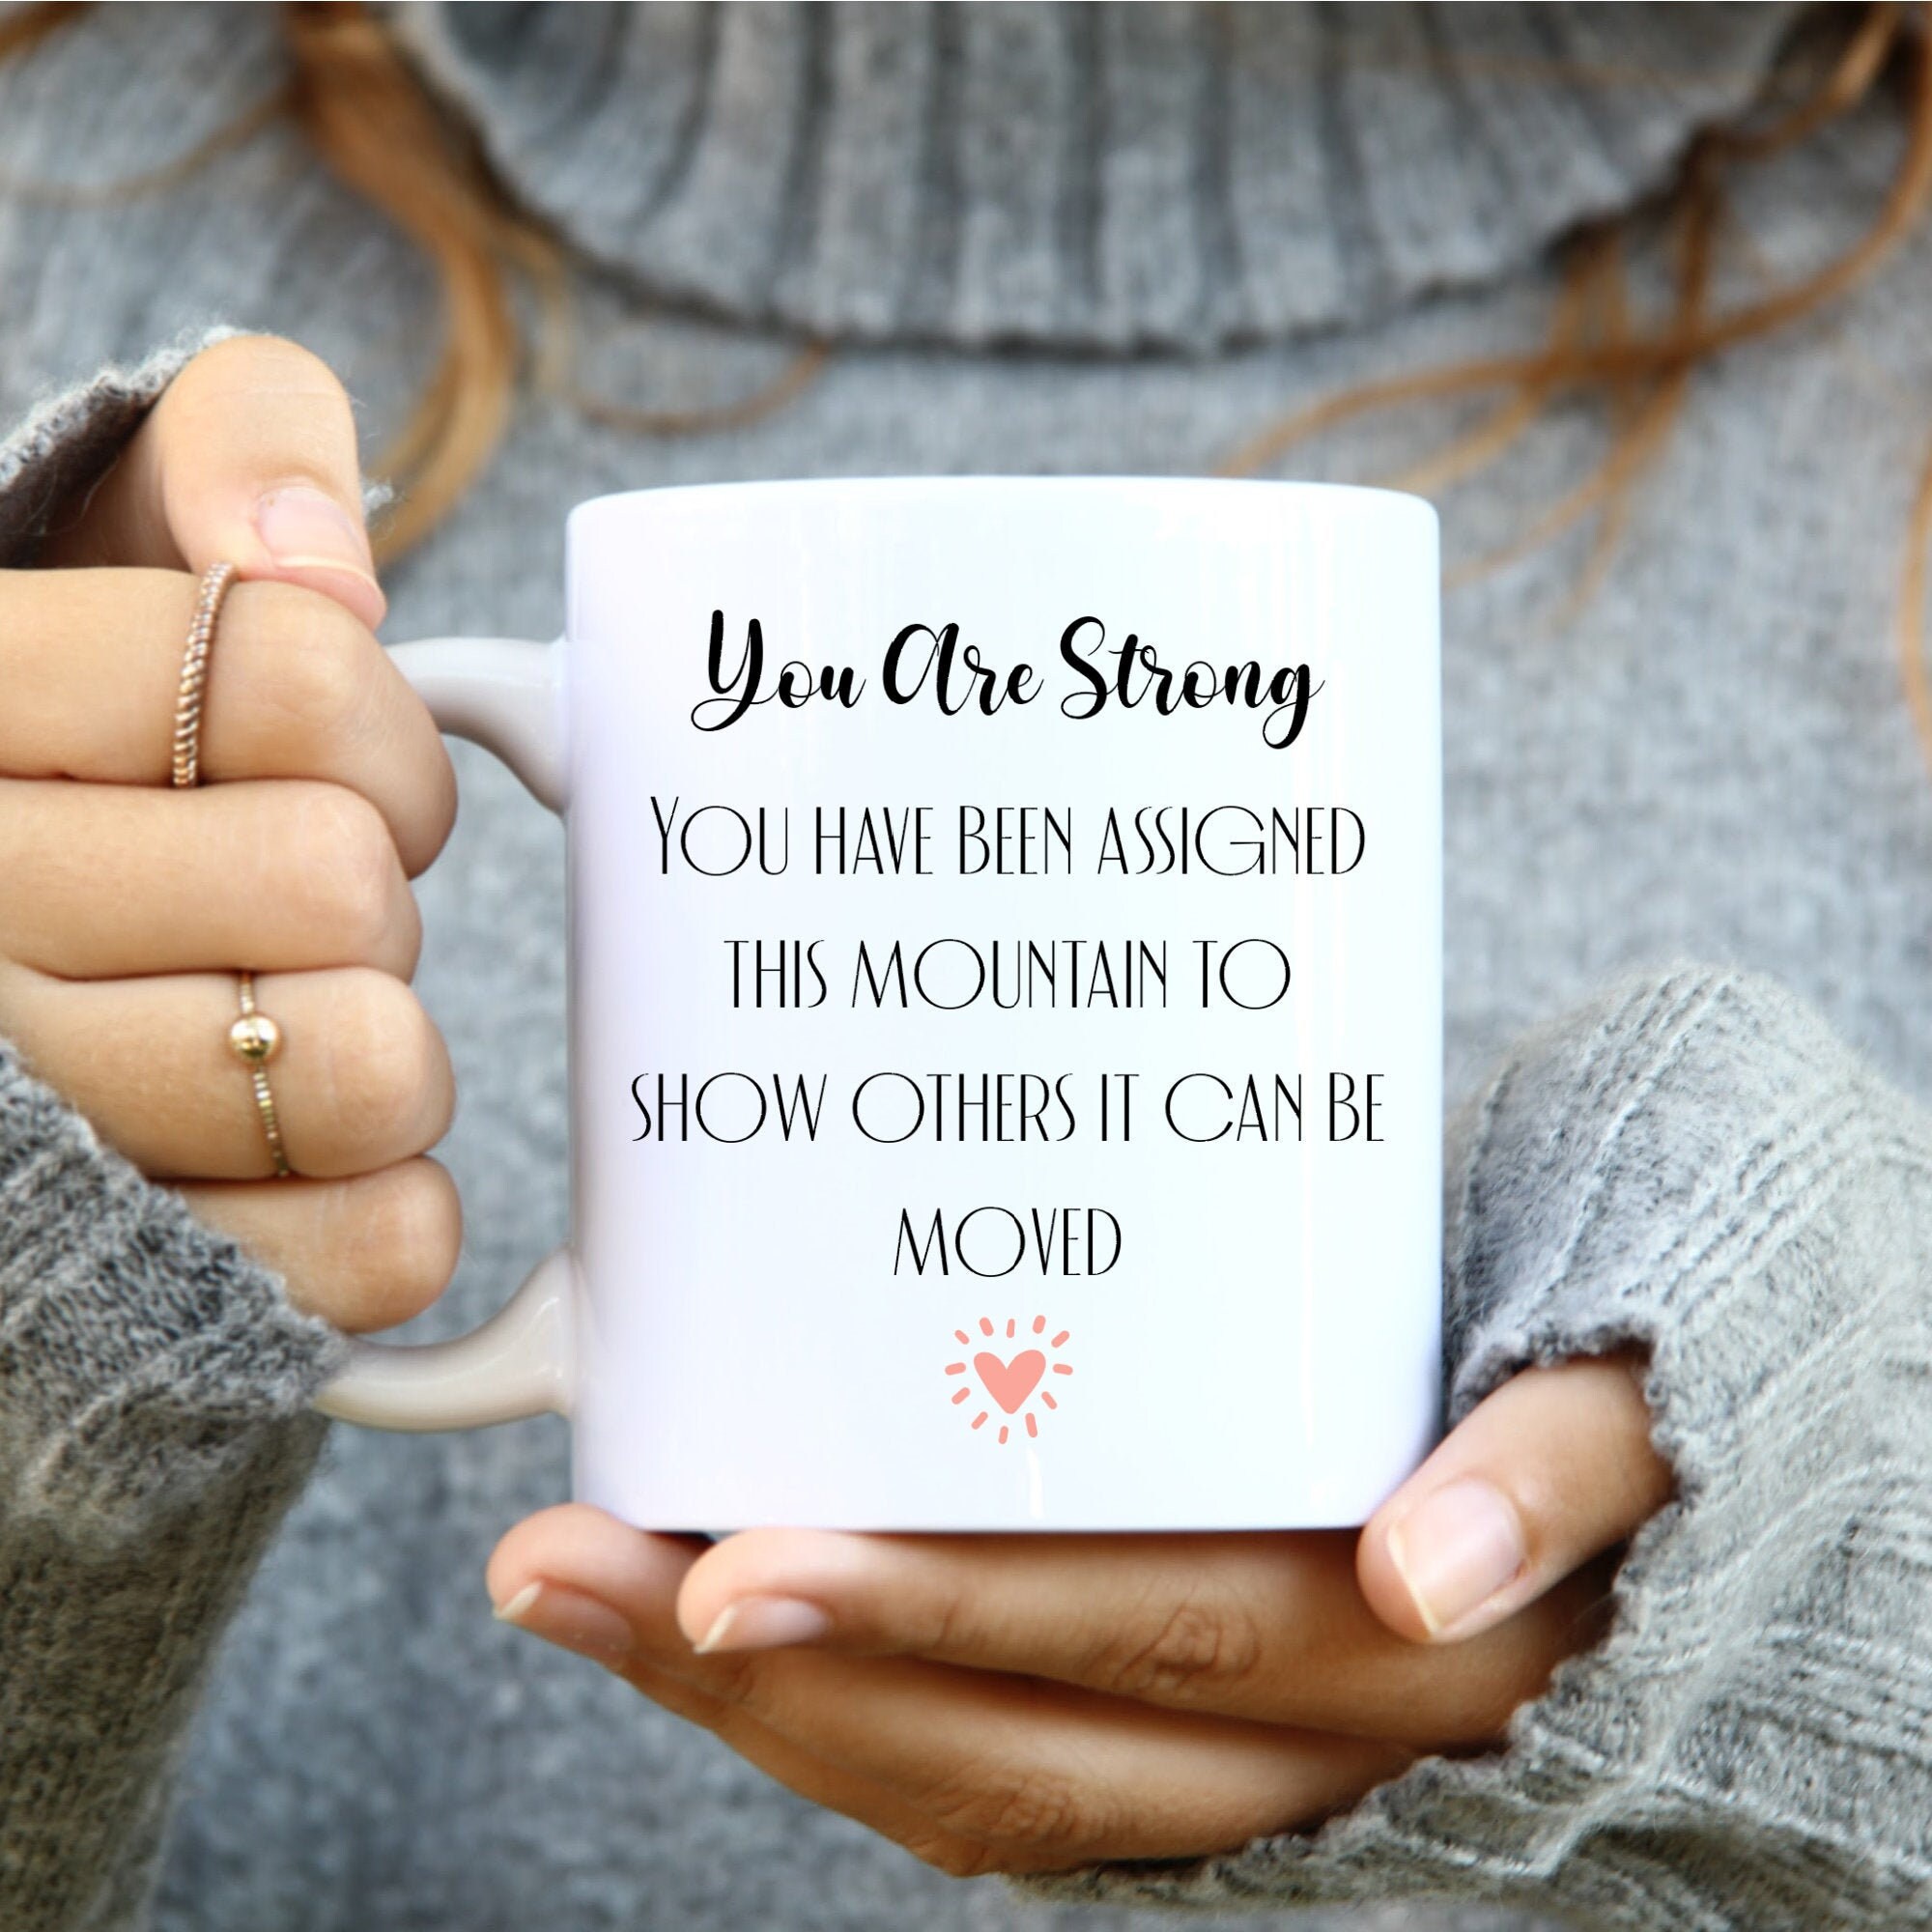 You Are Strong – Sympathy Gift, Illness, Sickness, Encouragement gift, Cancer Support Gift, Cancer Fighter Gift, Cancer Survivor, Warrior